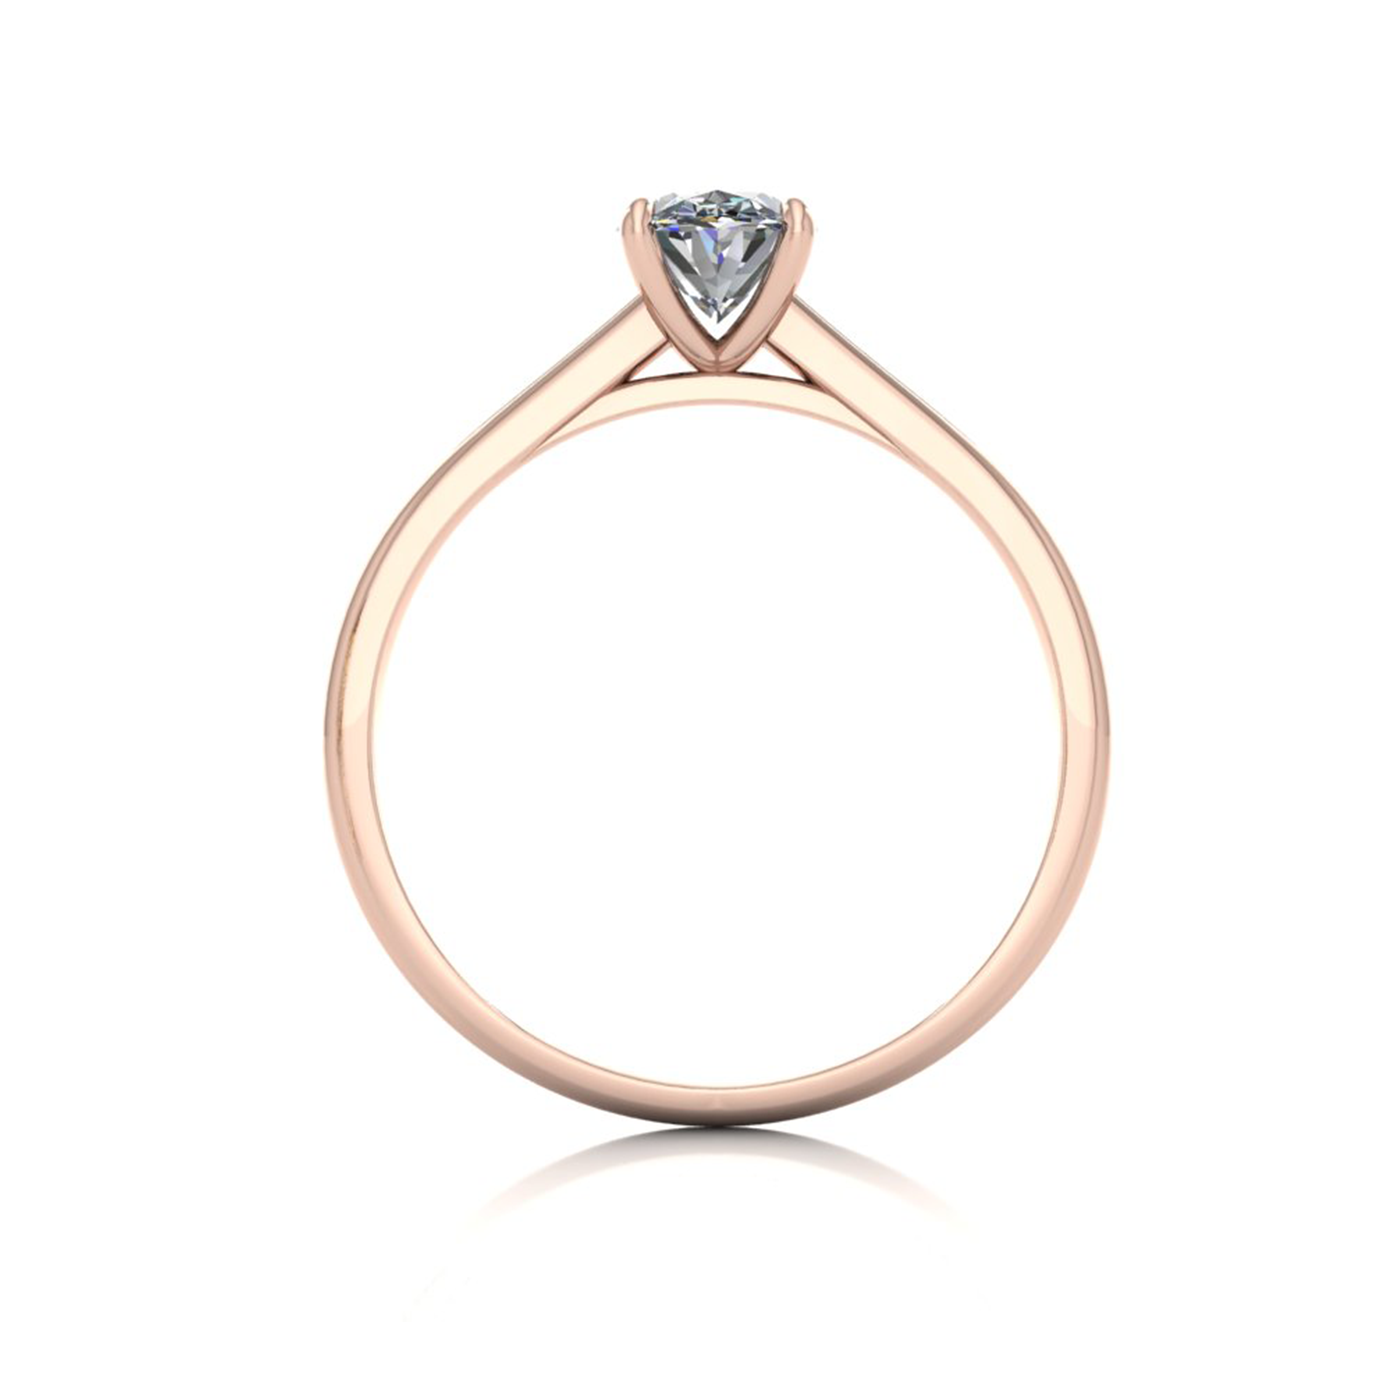 18k rose gold  0,80 ct 4 prongs solitaire oval cut diamond engagement ring with whisper thin band